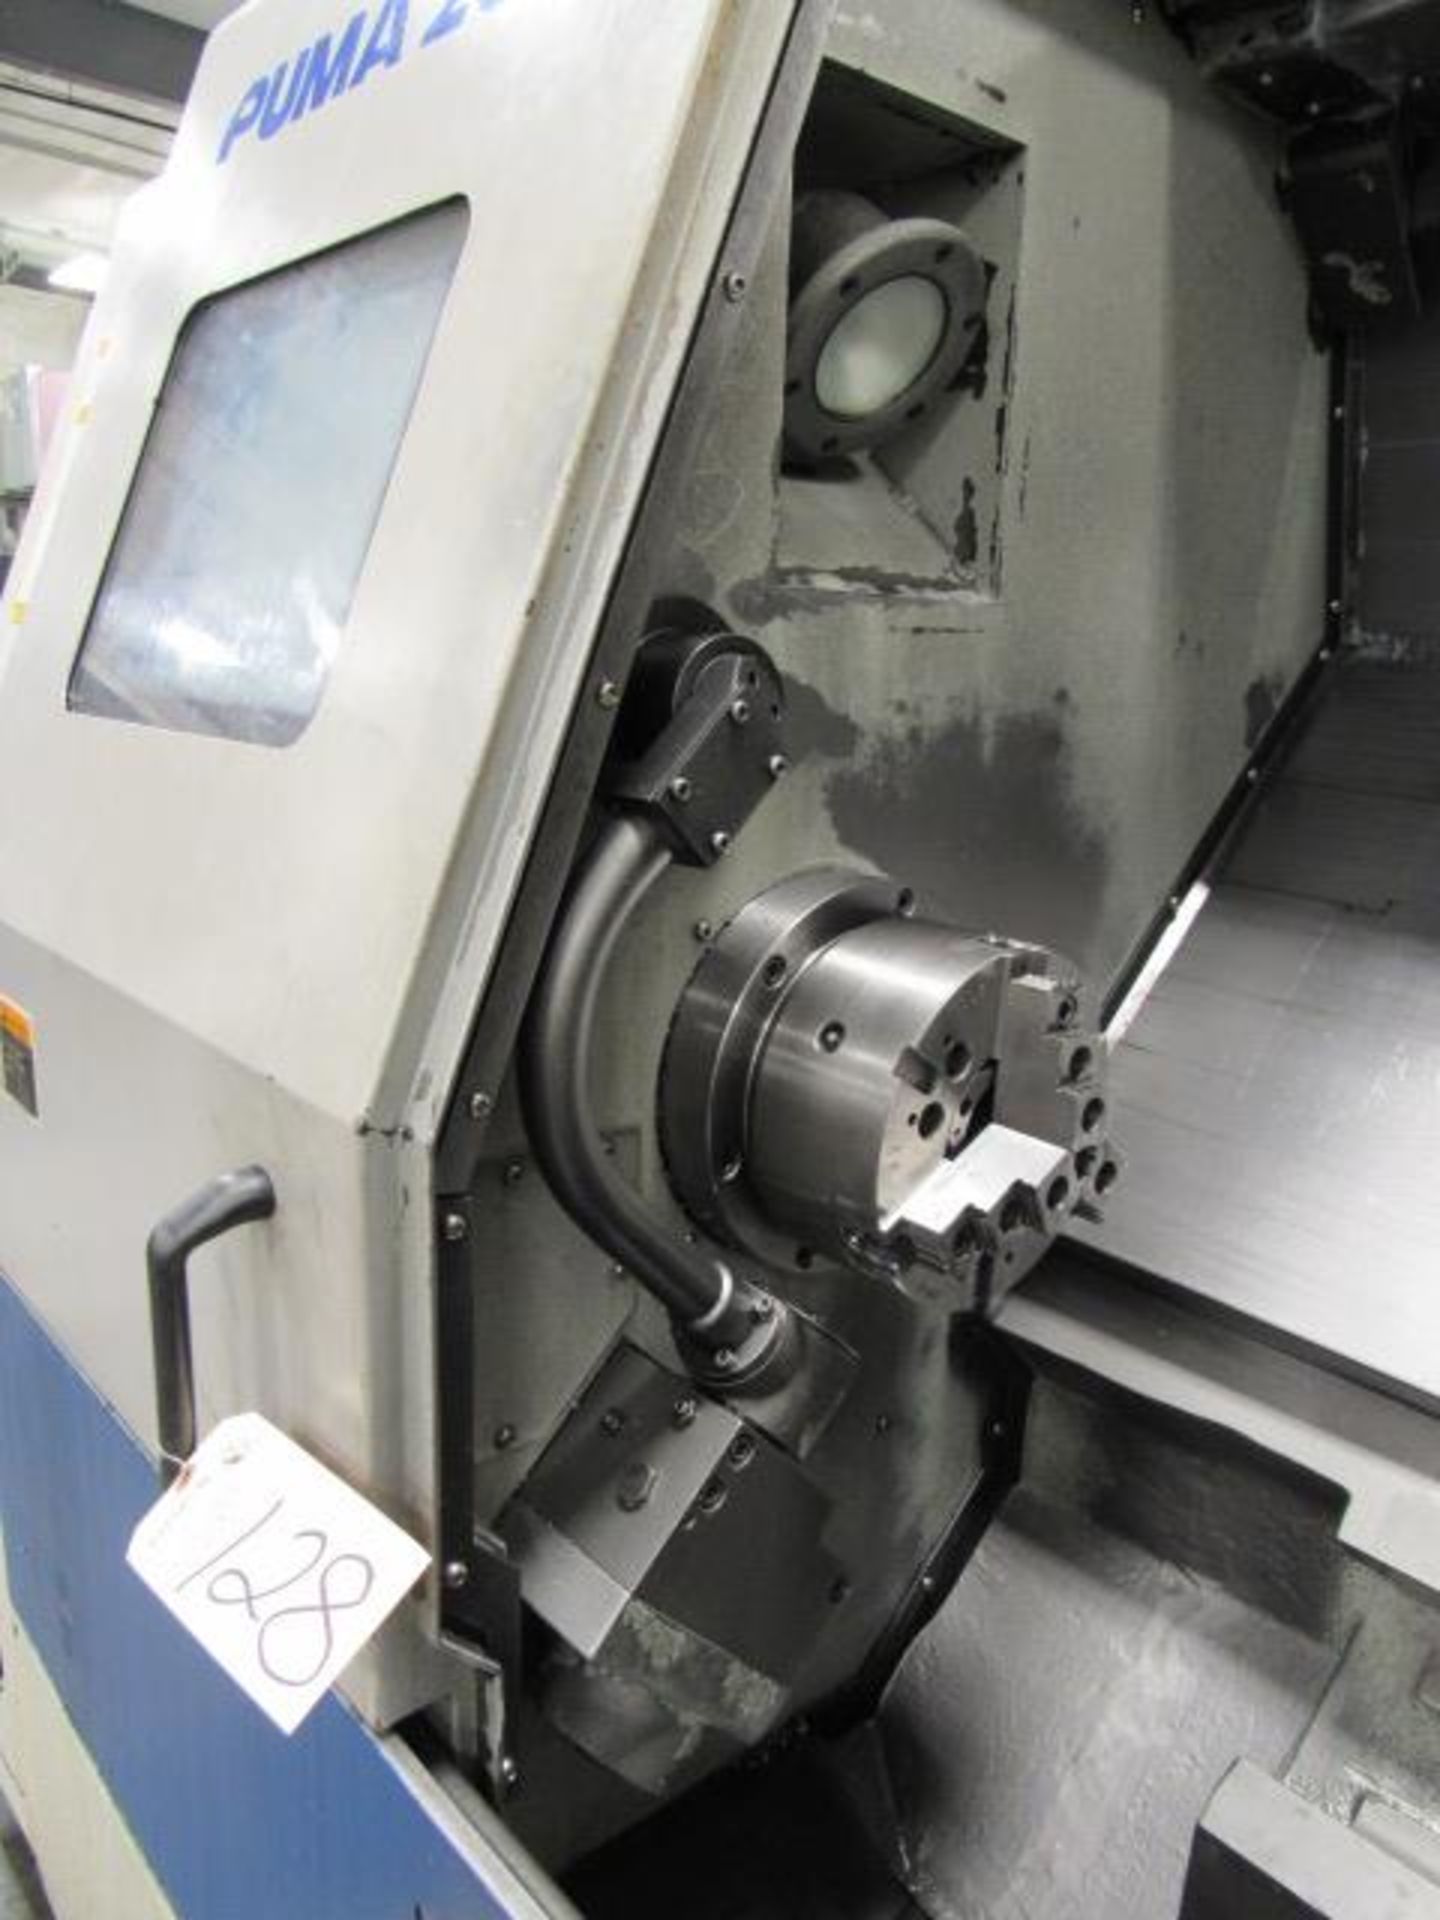 Daewoo Puma 200C CNC Turning Centers with 8'' 3-Jaw Chucks, 21'' Swing x 26.3'' Centers, Spindle - Image 3 of 8